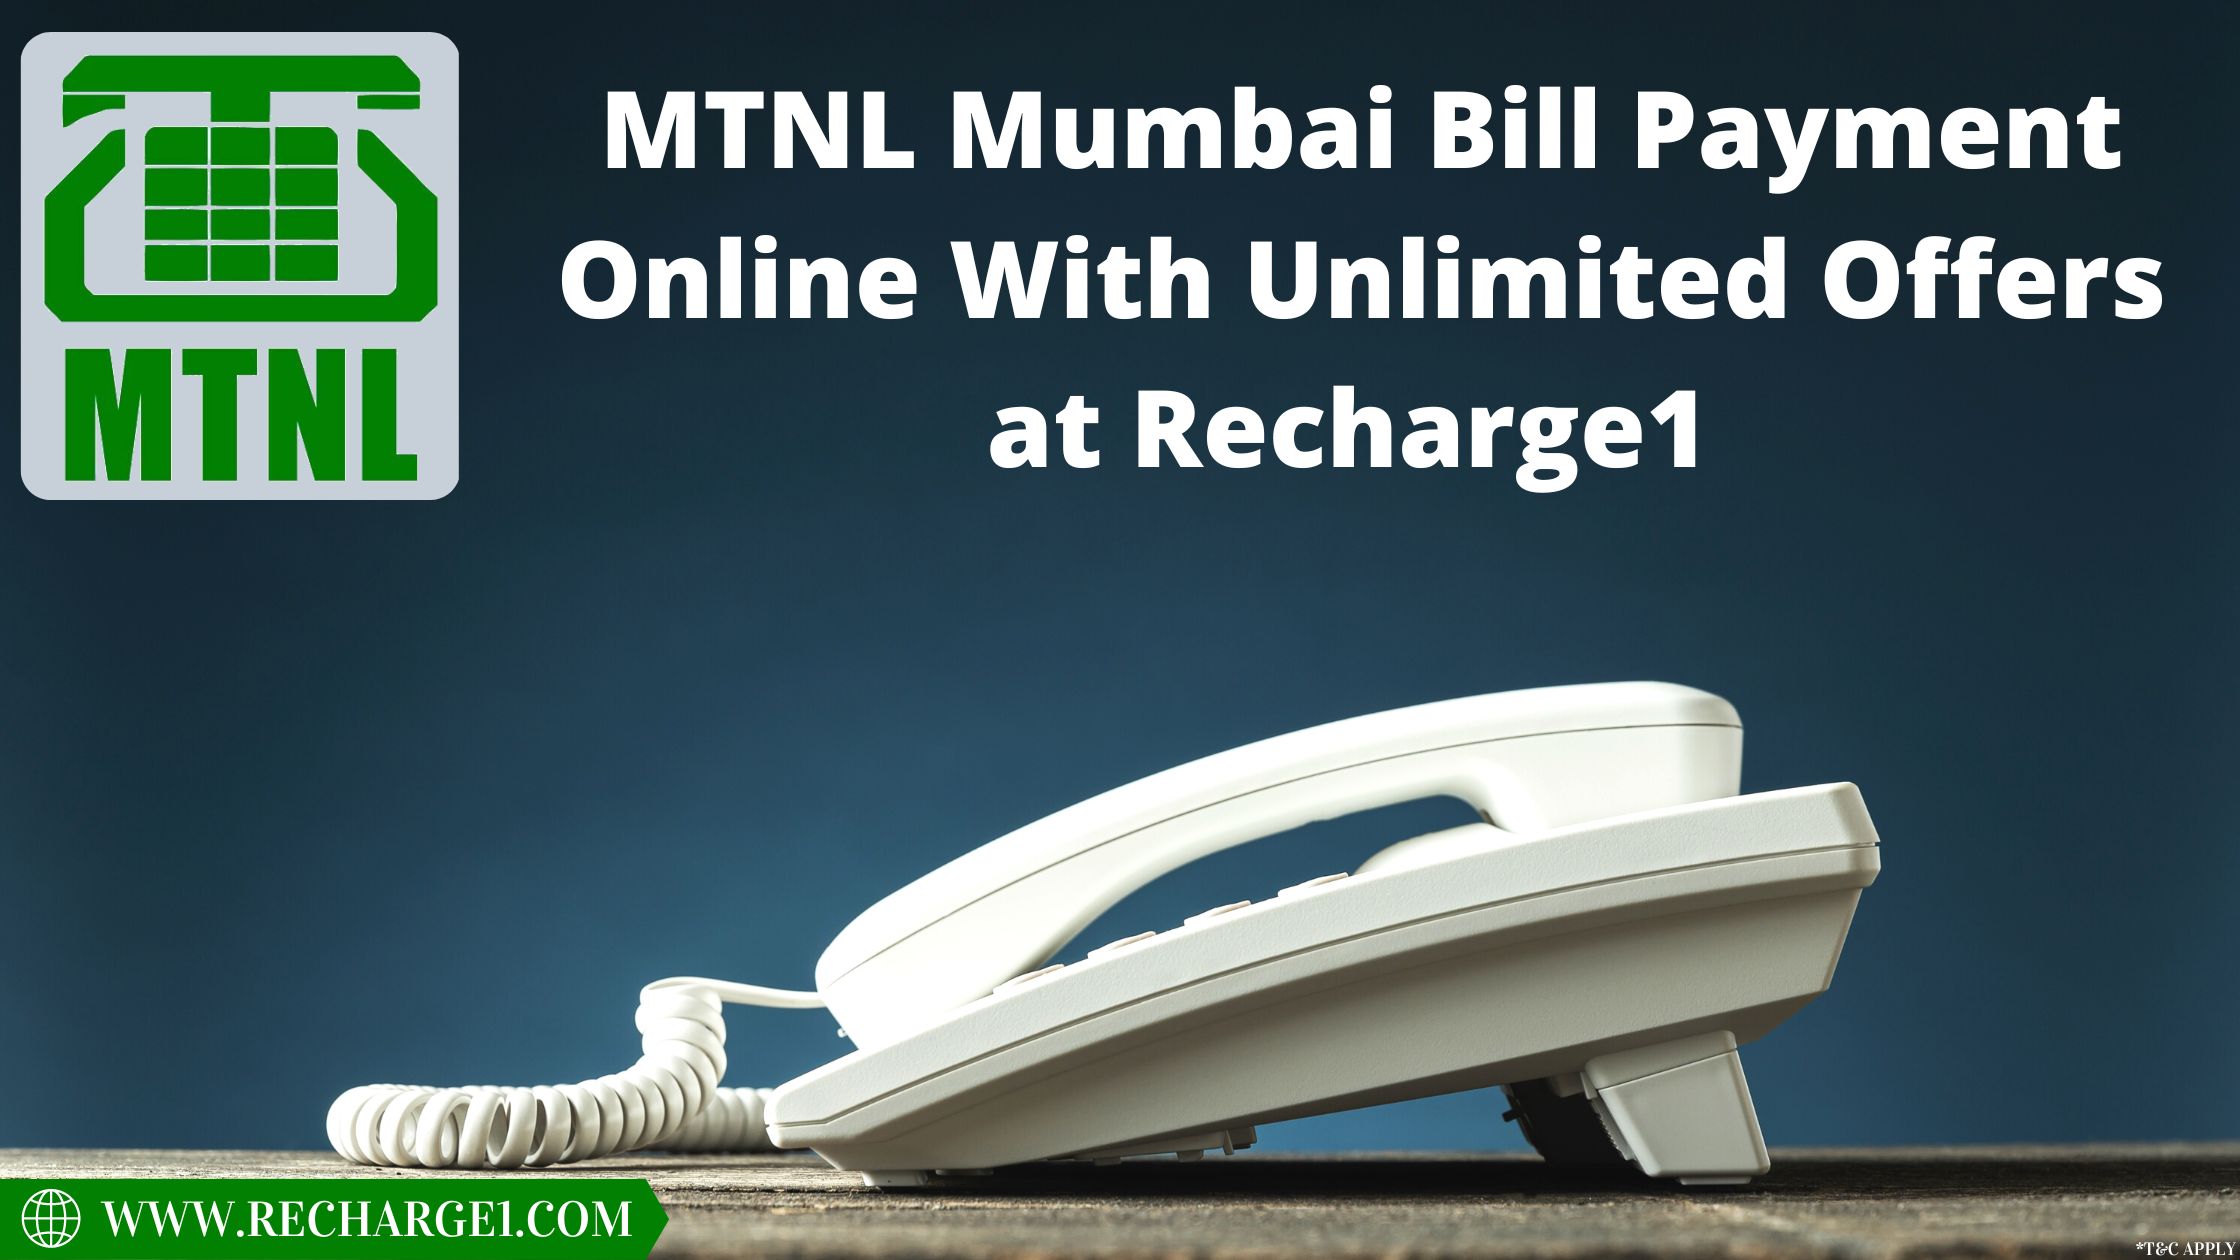  MTNL Mumbai Bill Payment Online With Unlimited Offers at Recharge1